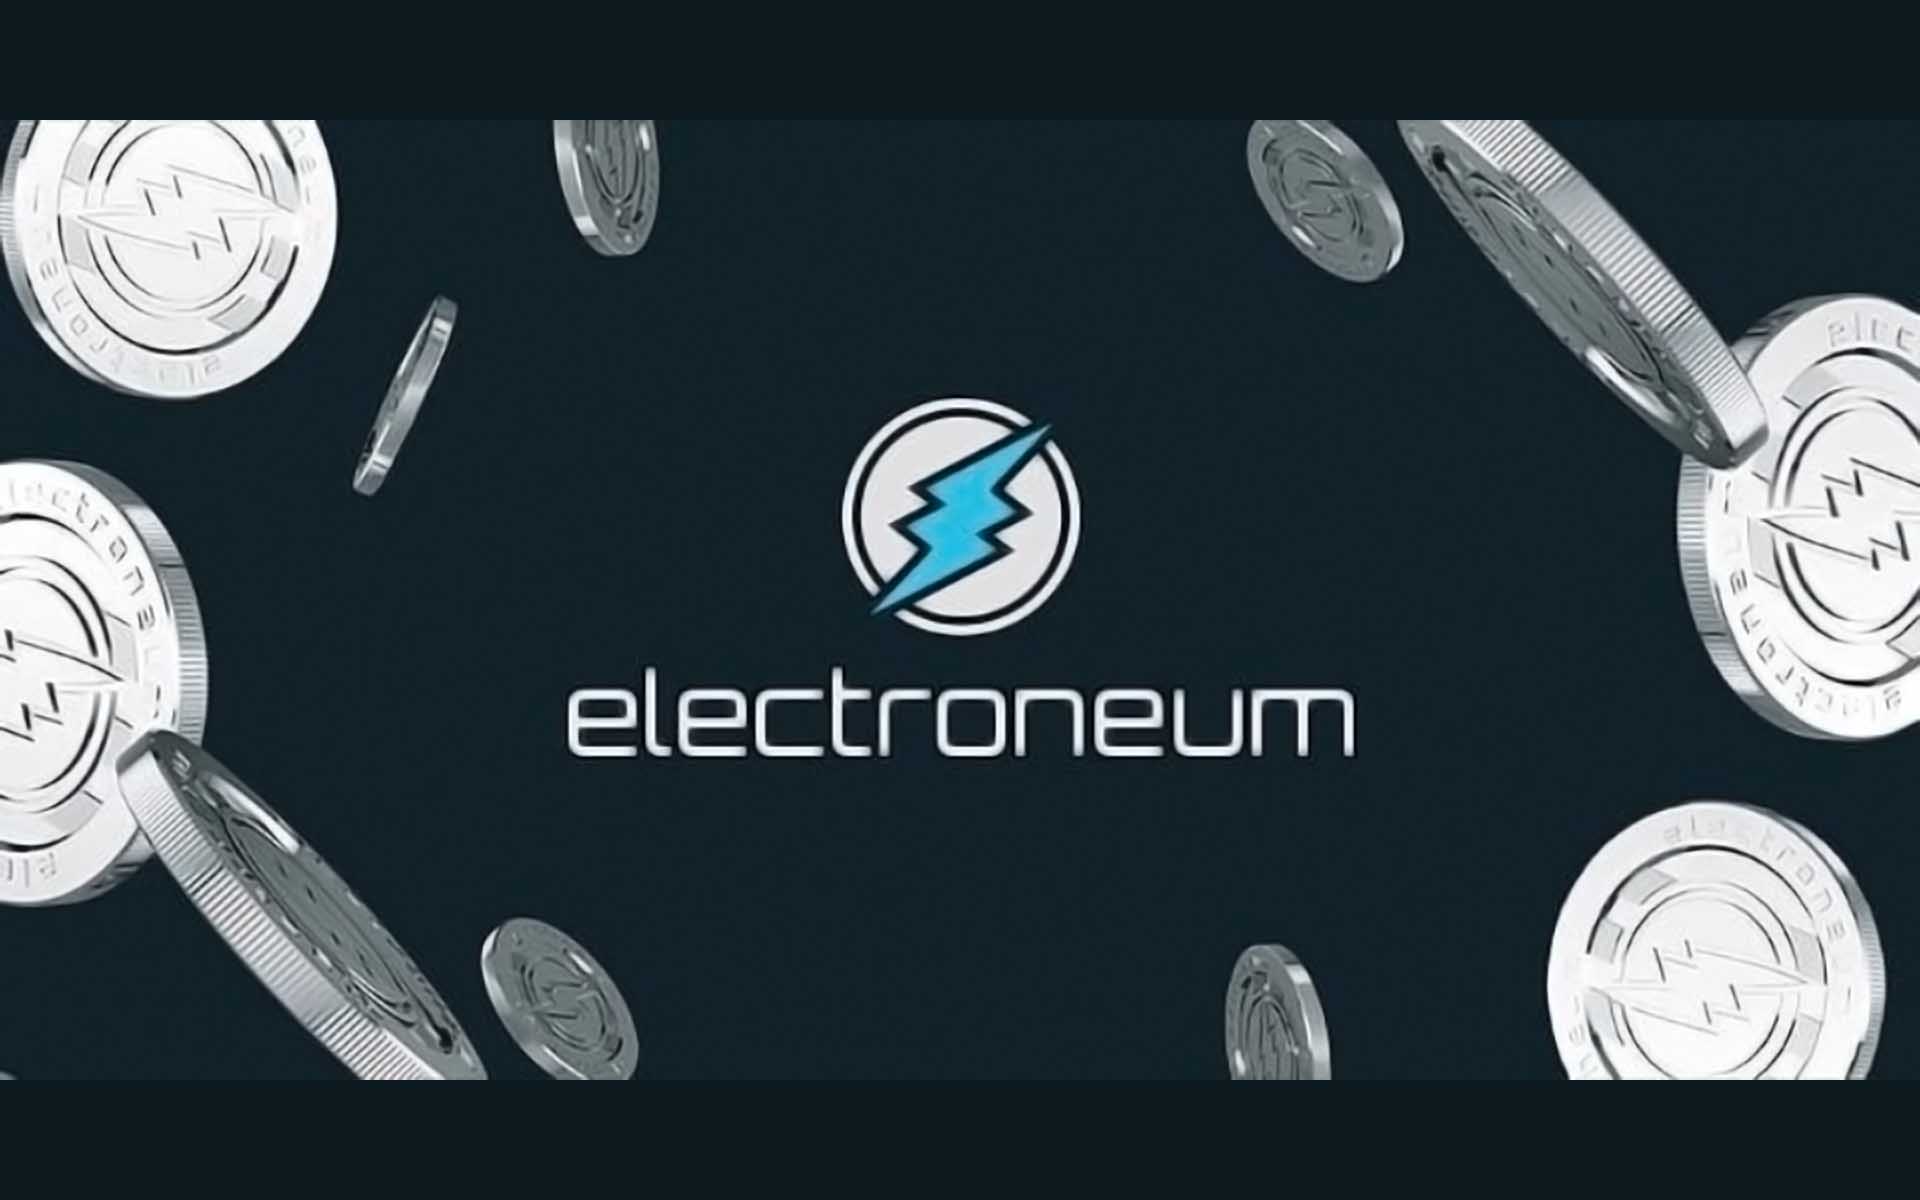 Electroneum gets compared to bitcoin